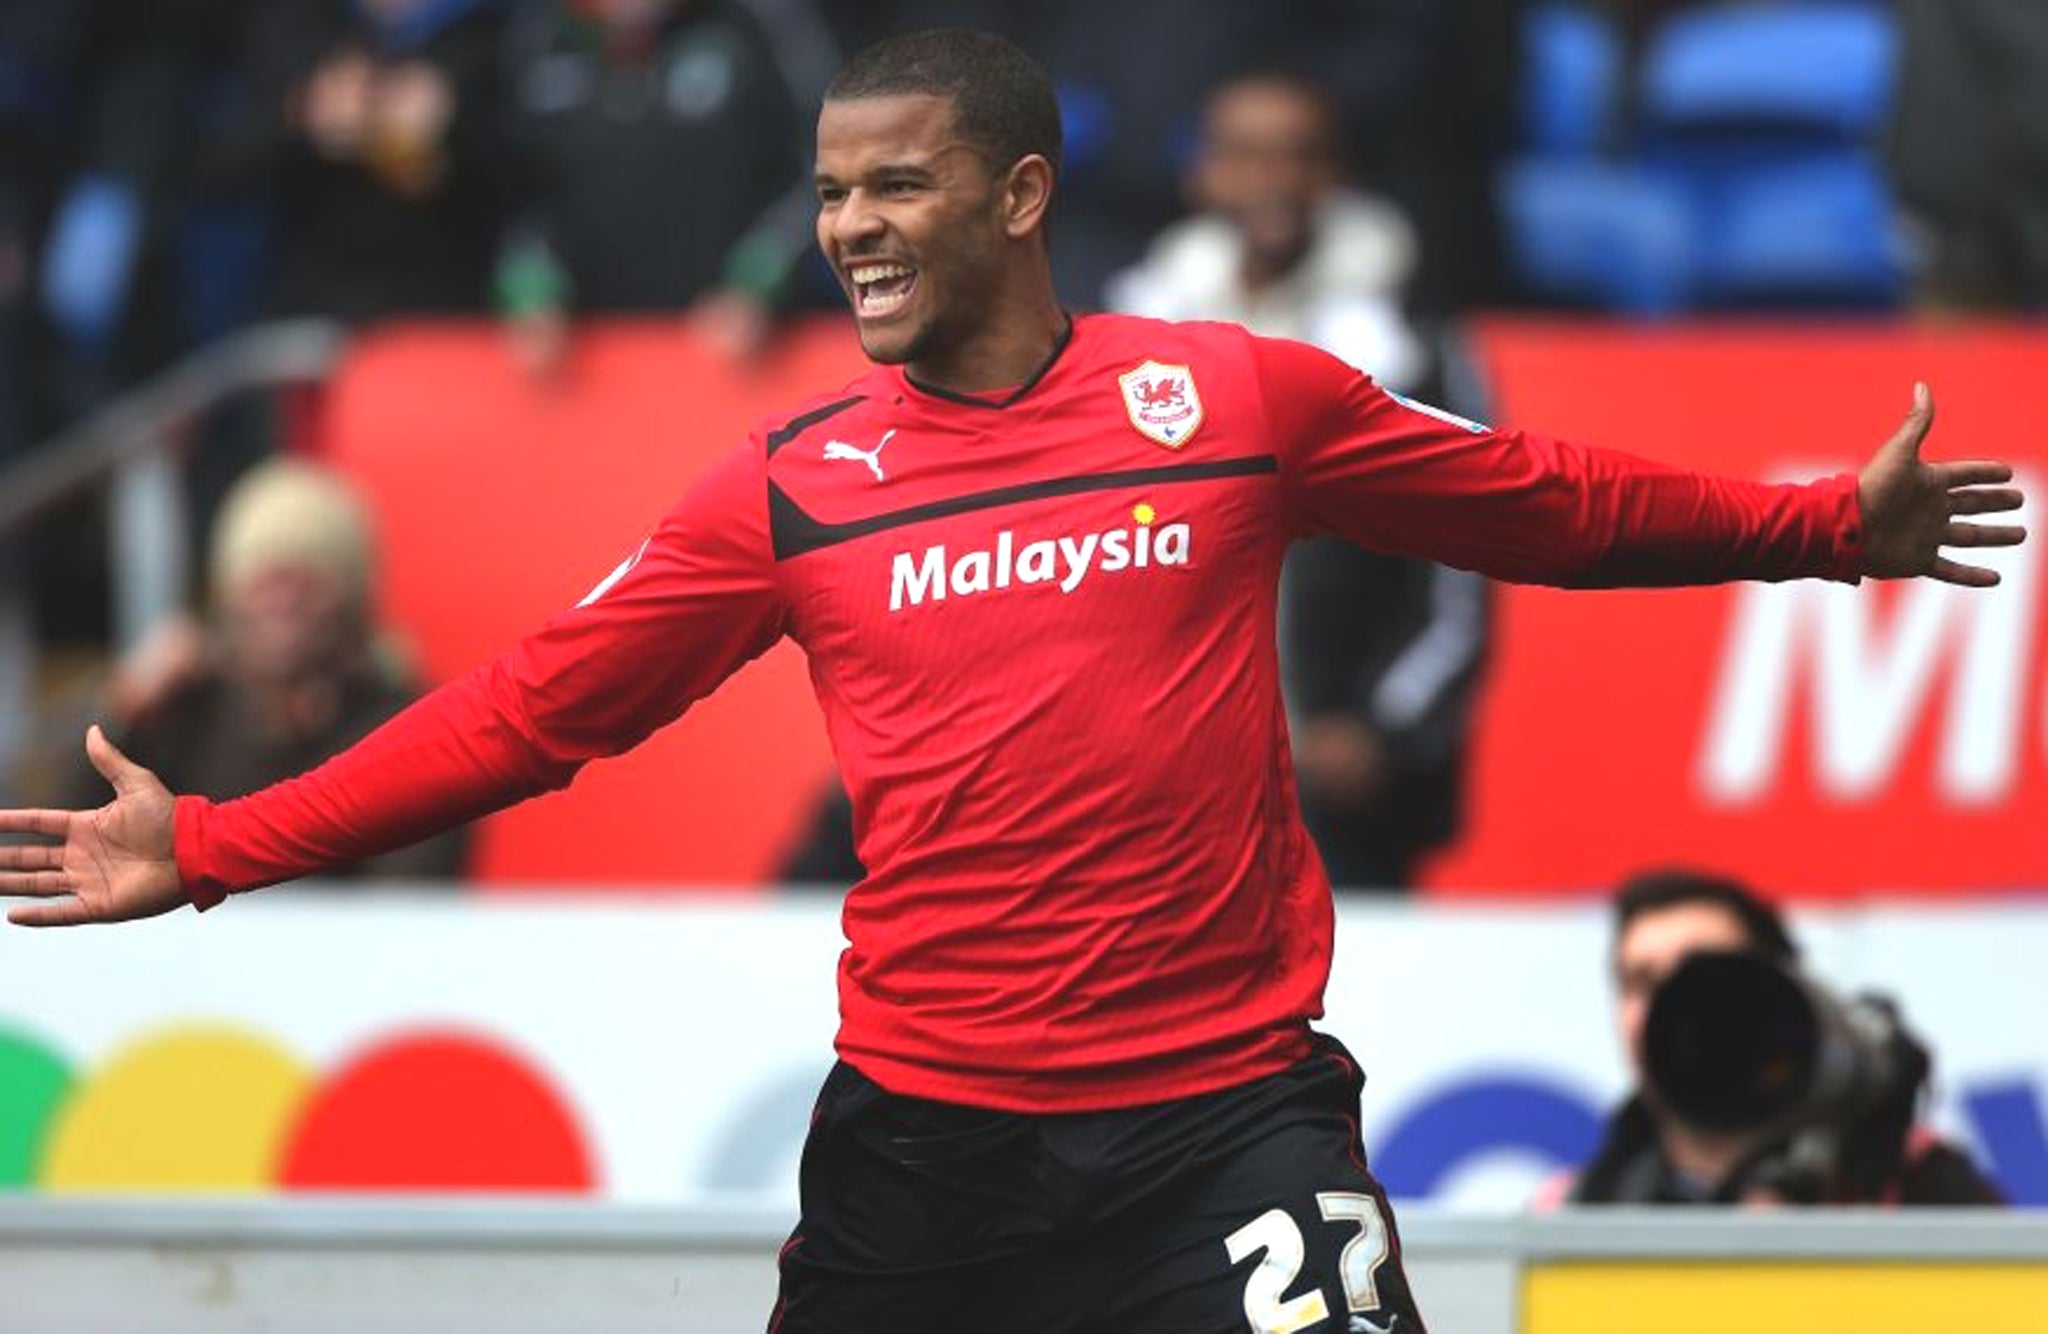 Fraizer Campbell is enjoying a new lease of life at Cardiff having only made three appearances for Manchester United